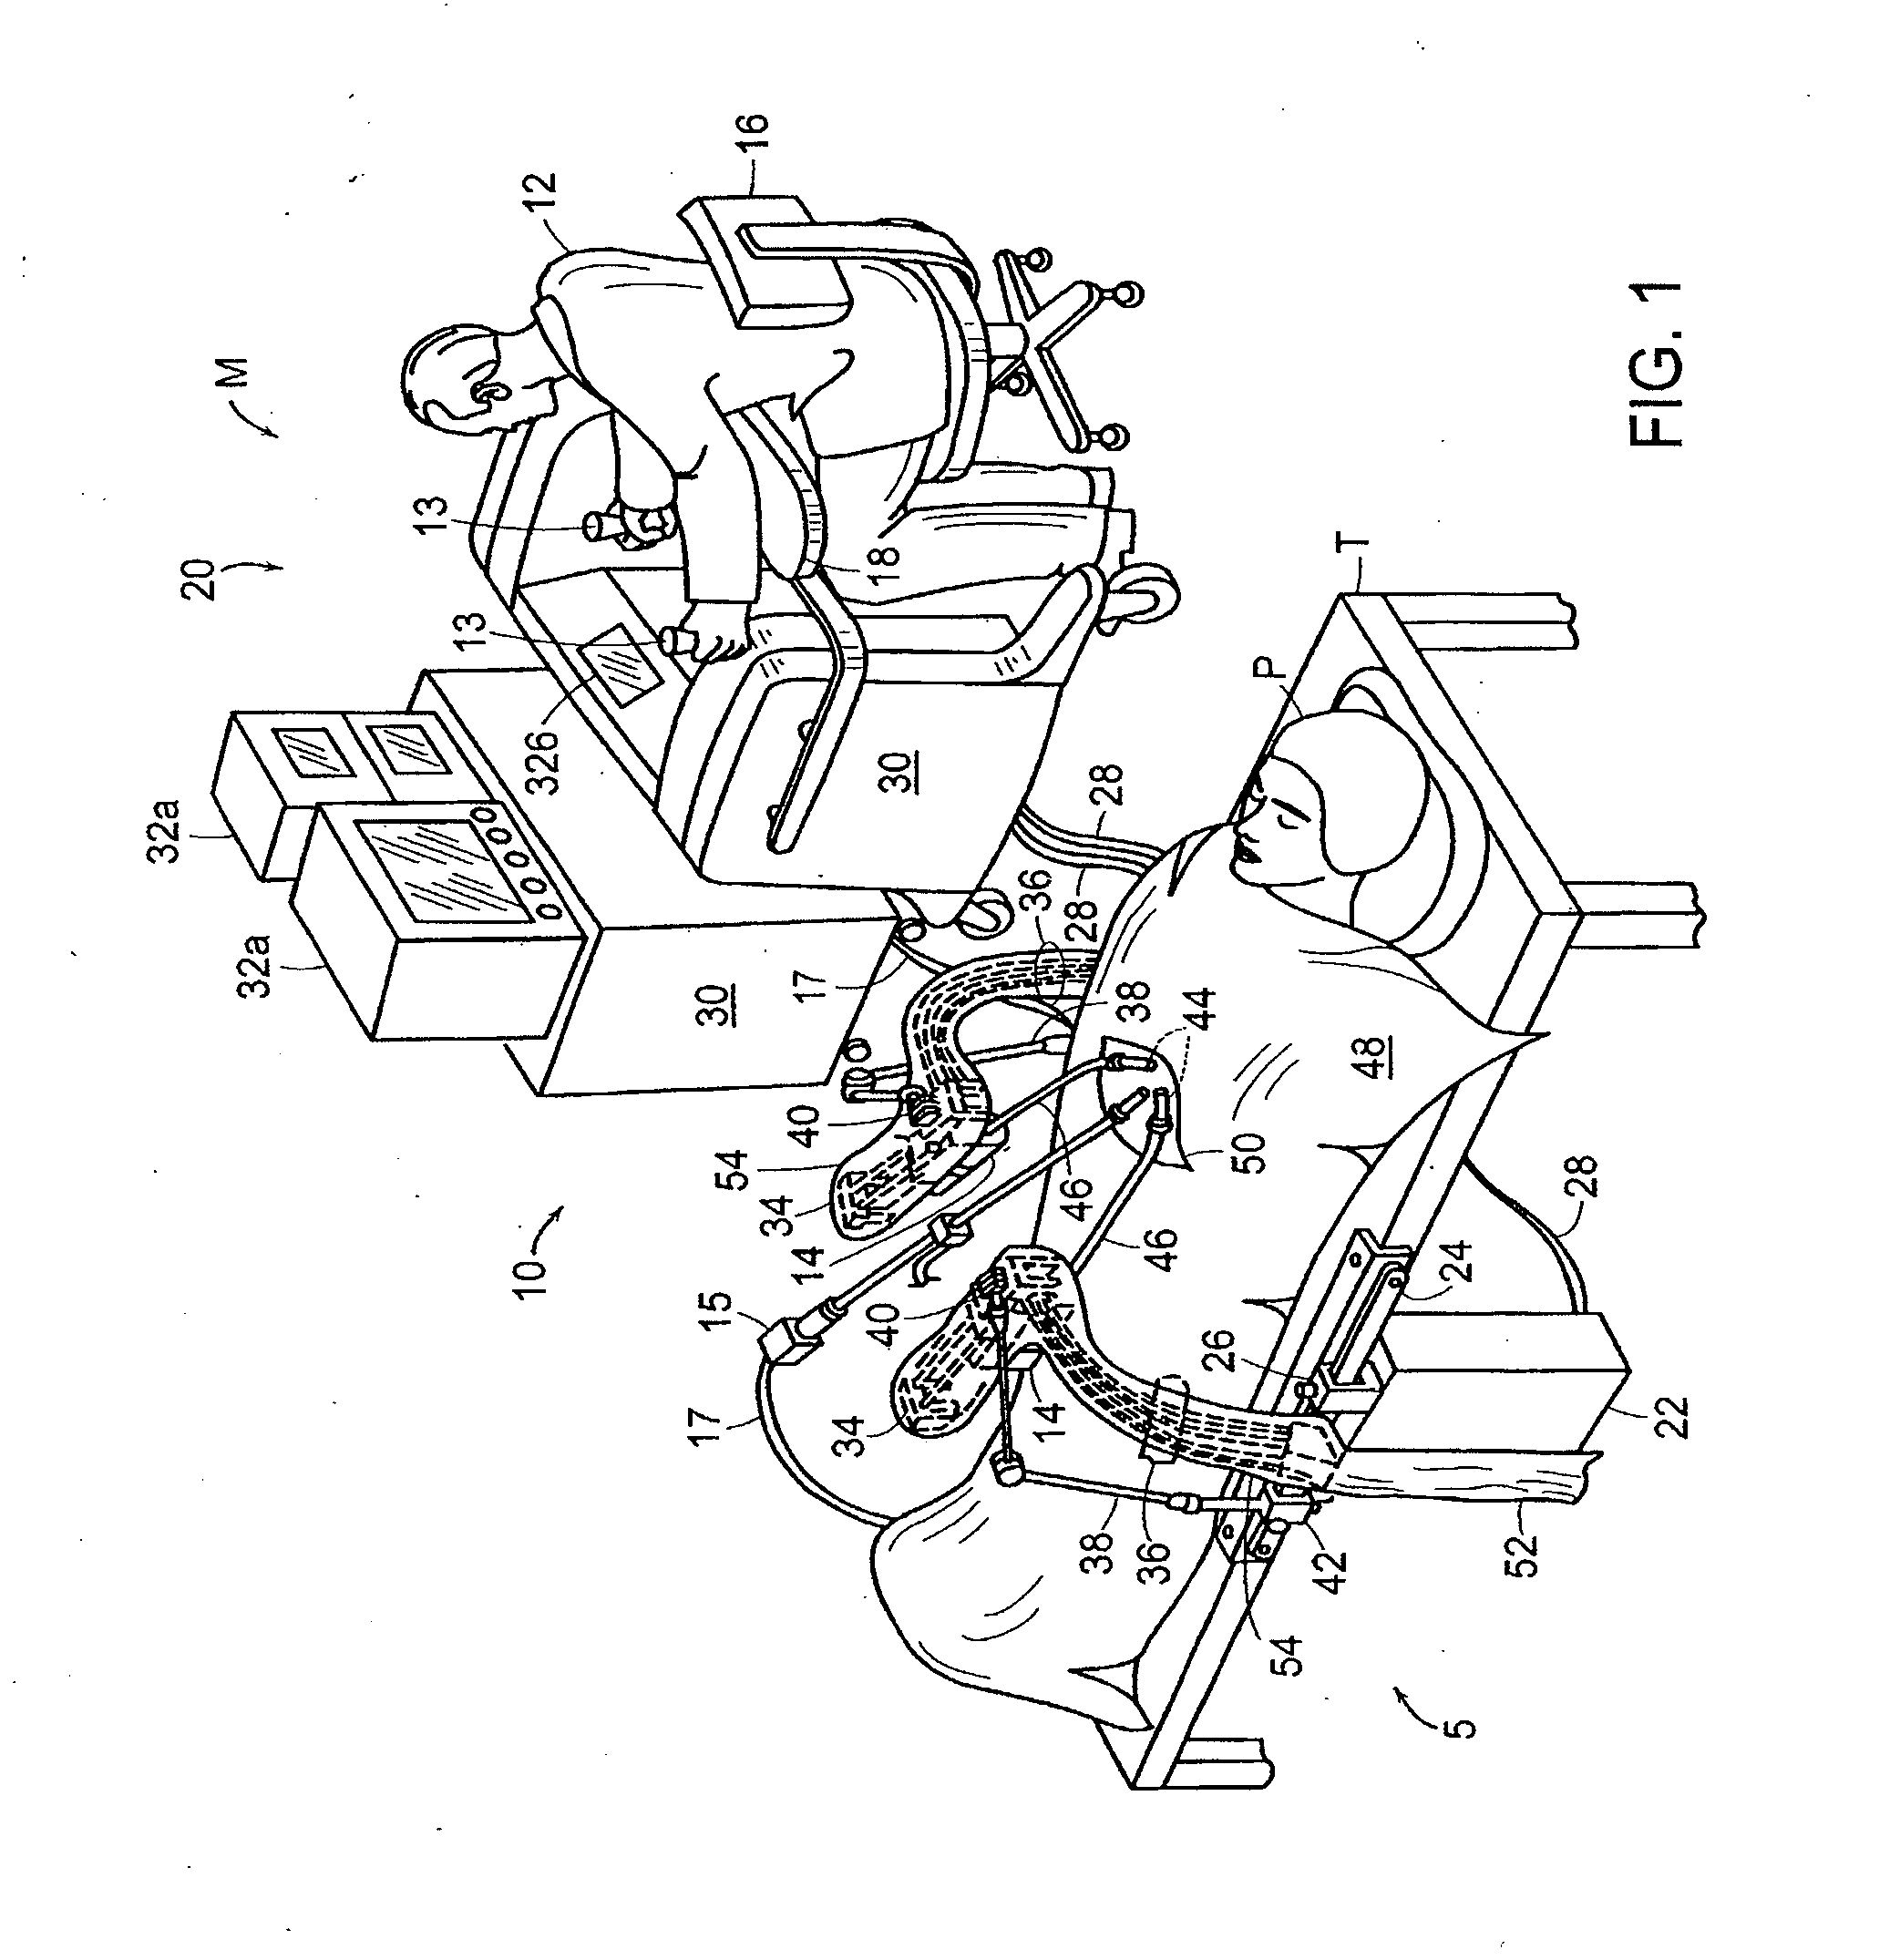 Surgical instrument coupling mechanism